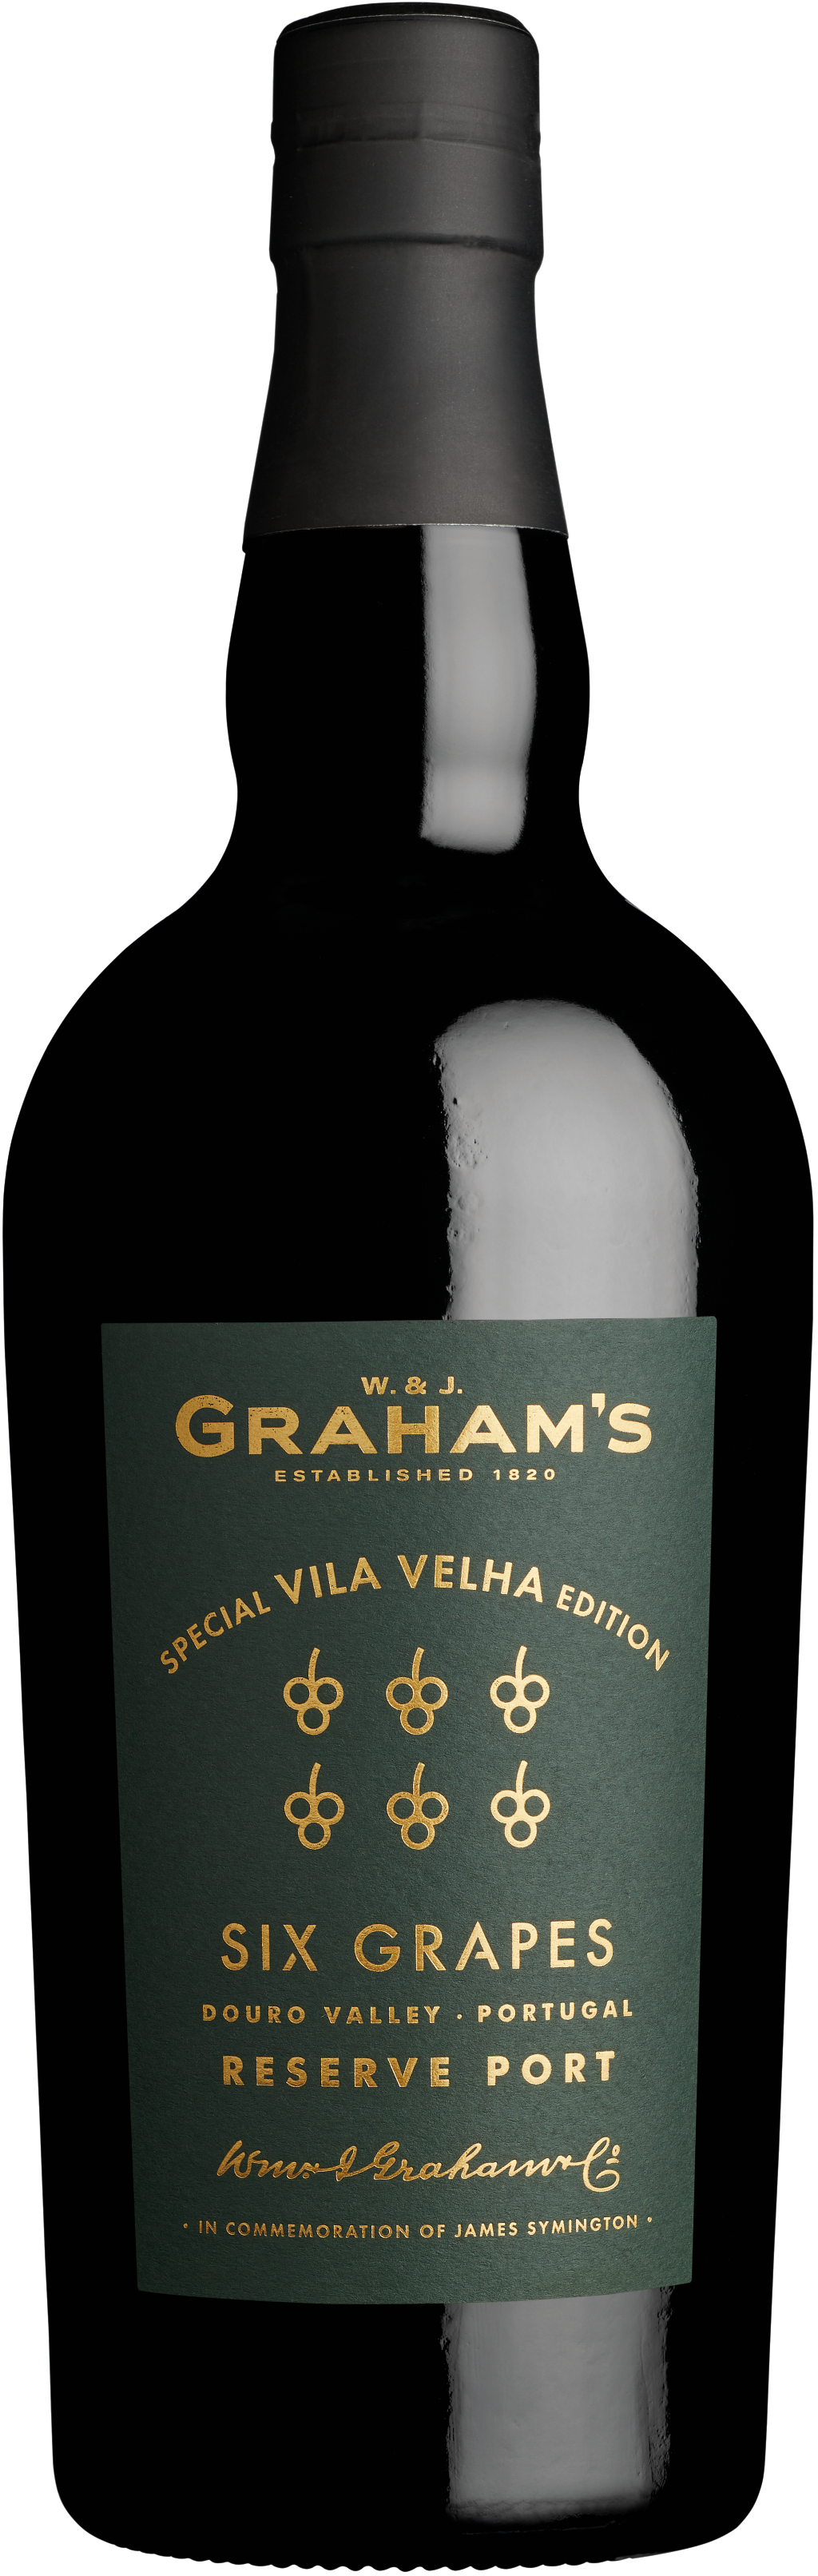 Product Image for GRAHAM'S SIX GRAPES SPECIAL 'VILHA VELHA' EDITION